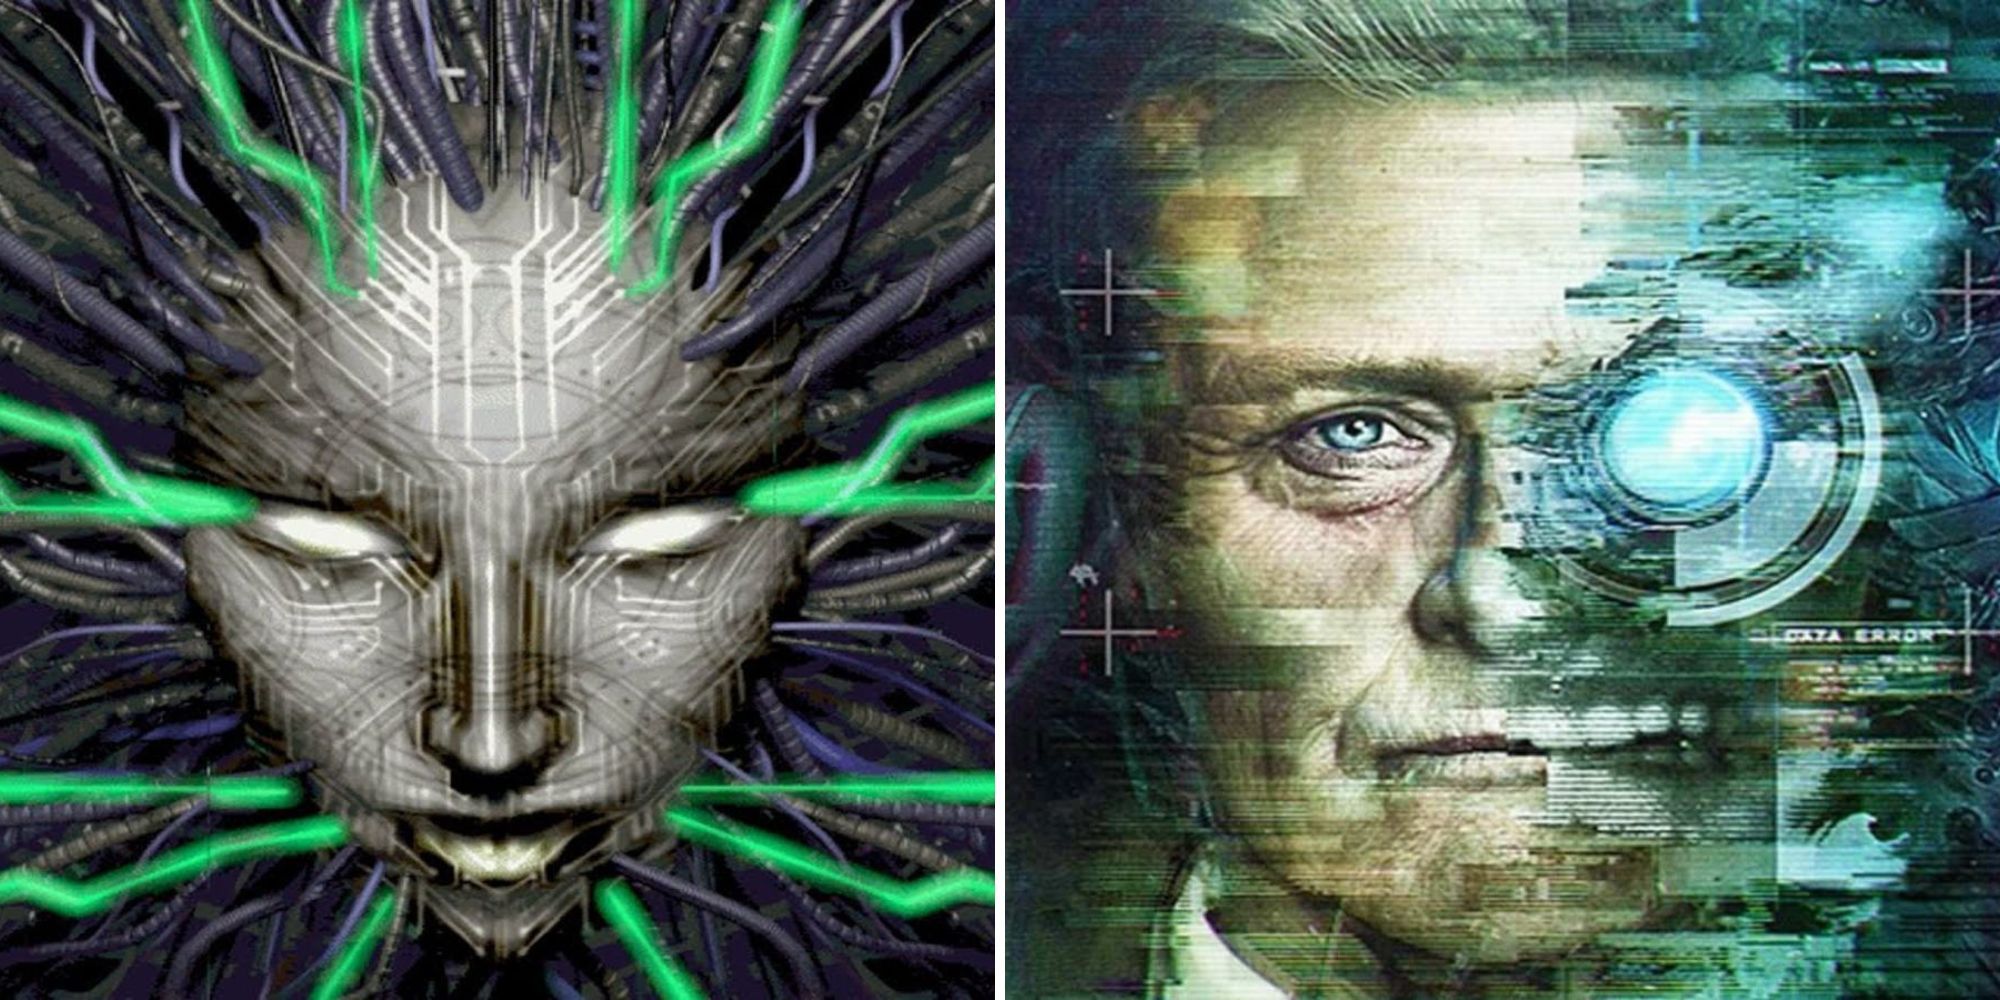 Tow of the best techno-horror games: System Shock and Observer